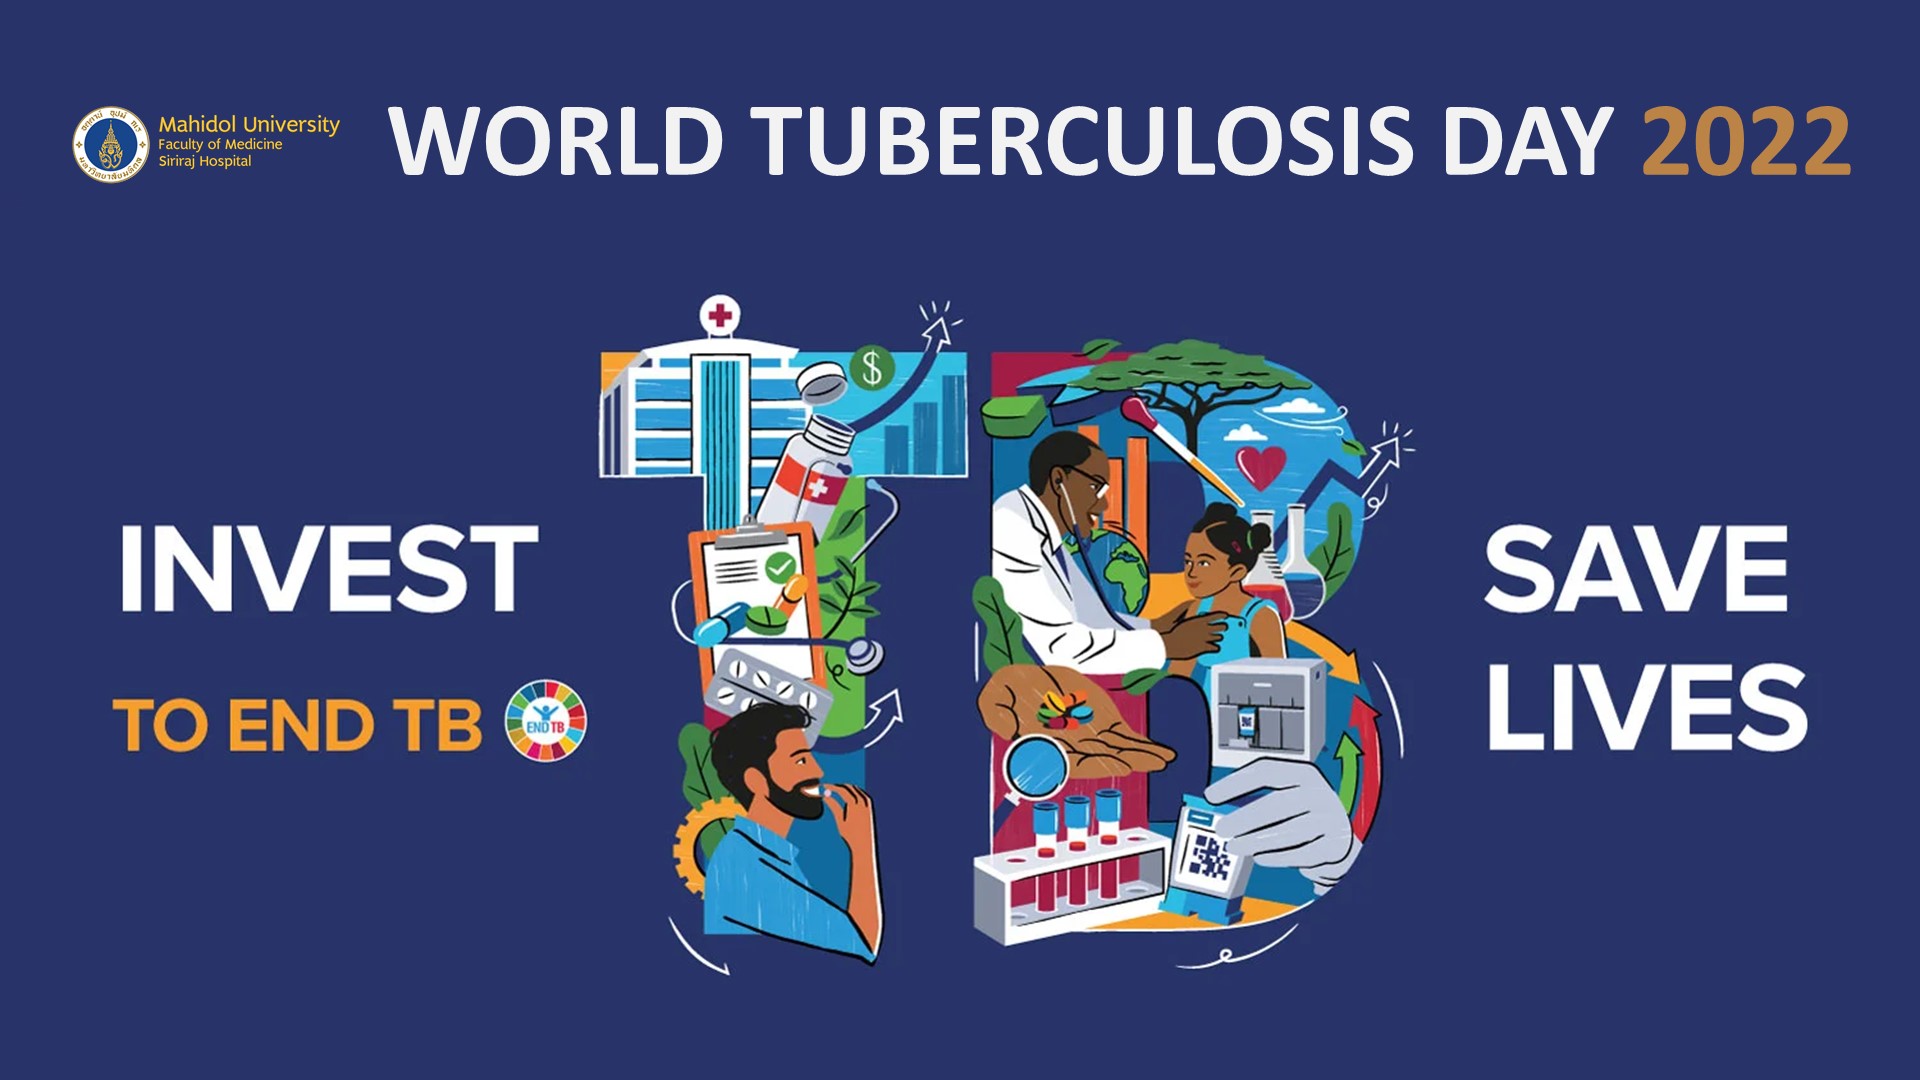 World Tuberculosis Day 2022 “Invest to End TB. Save Lives”